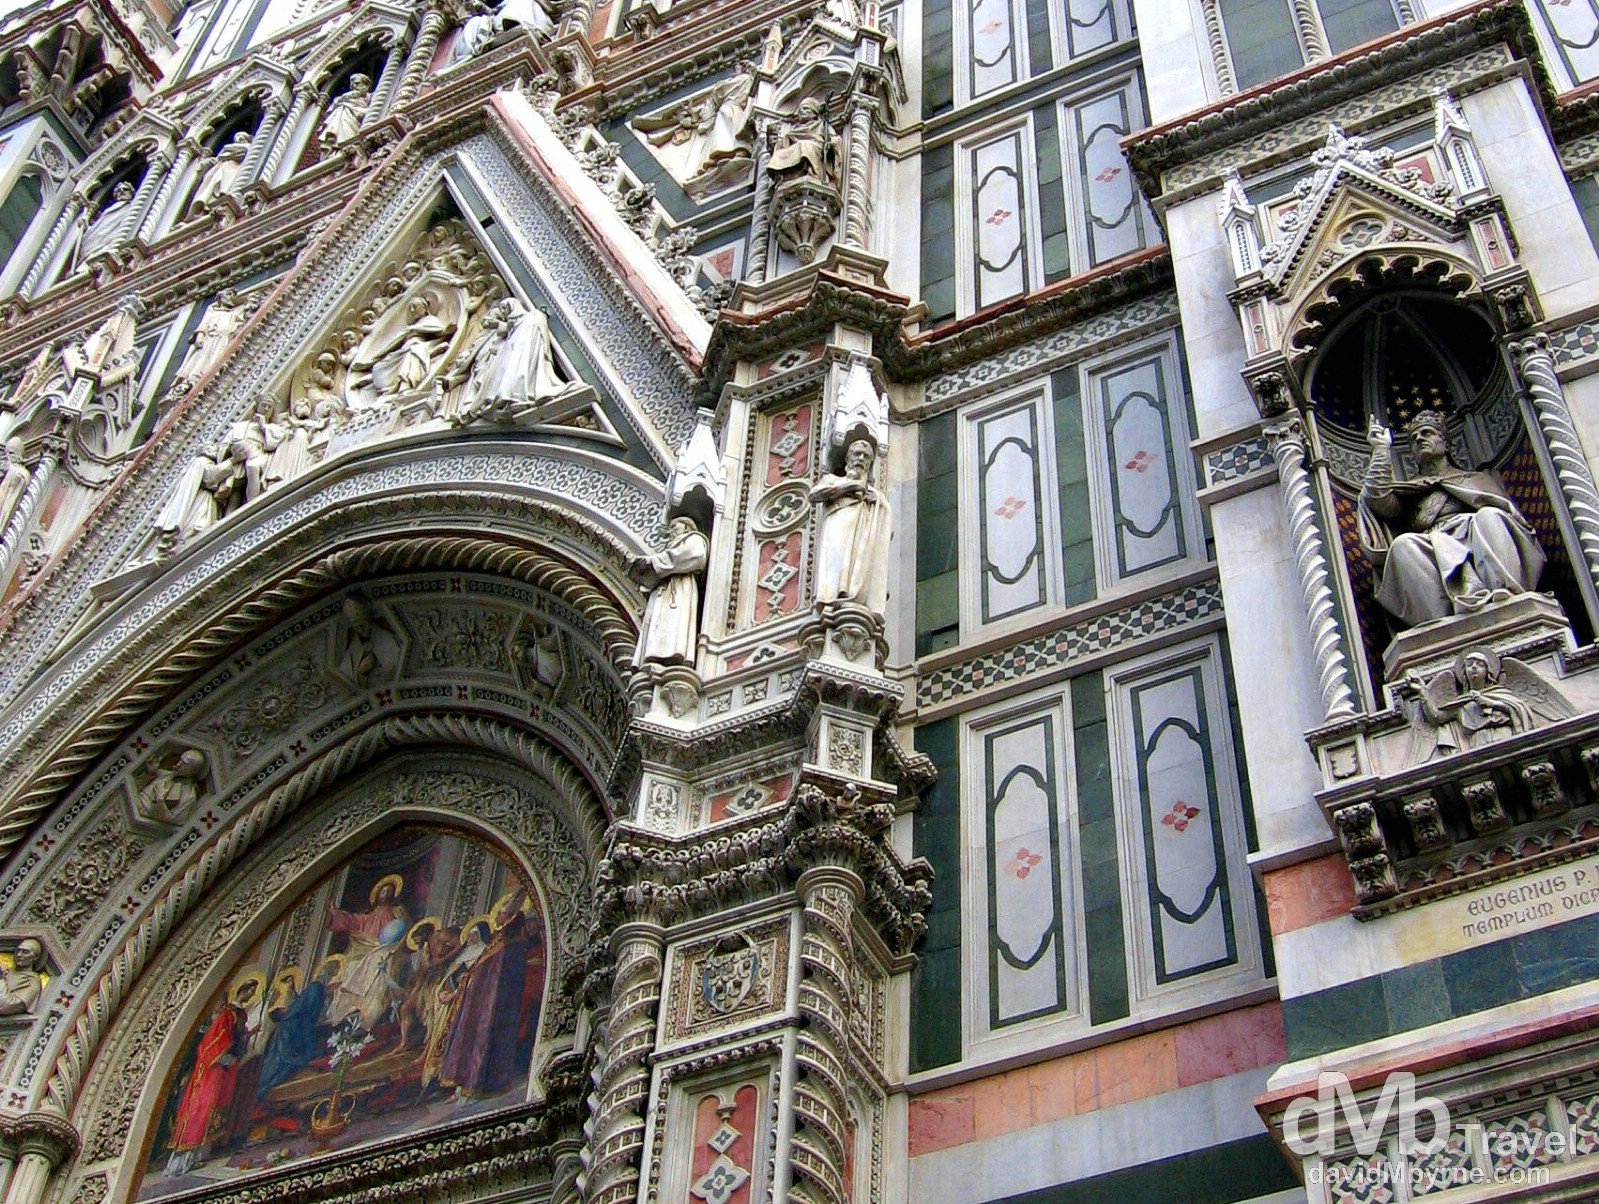 A section of the facade of the Dumo in Plazza del Dumo, Florence, Tuscany, Italy. August 29th, 2007.